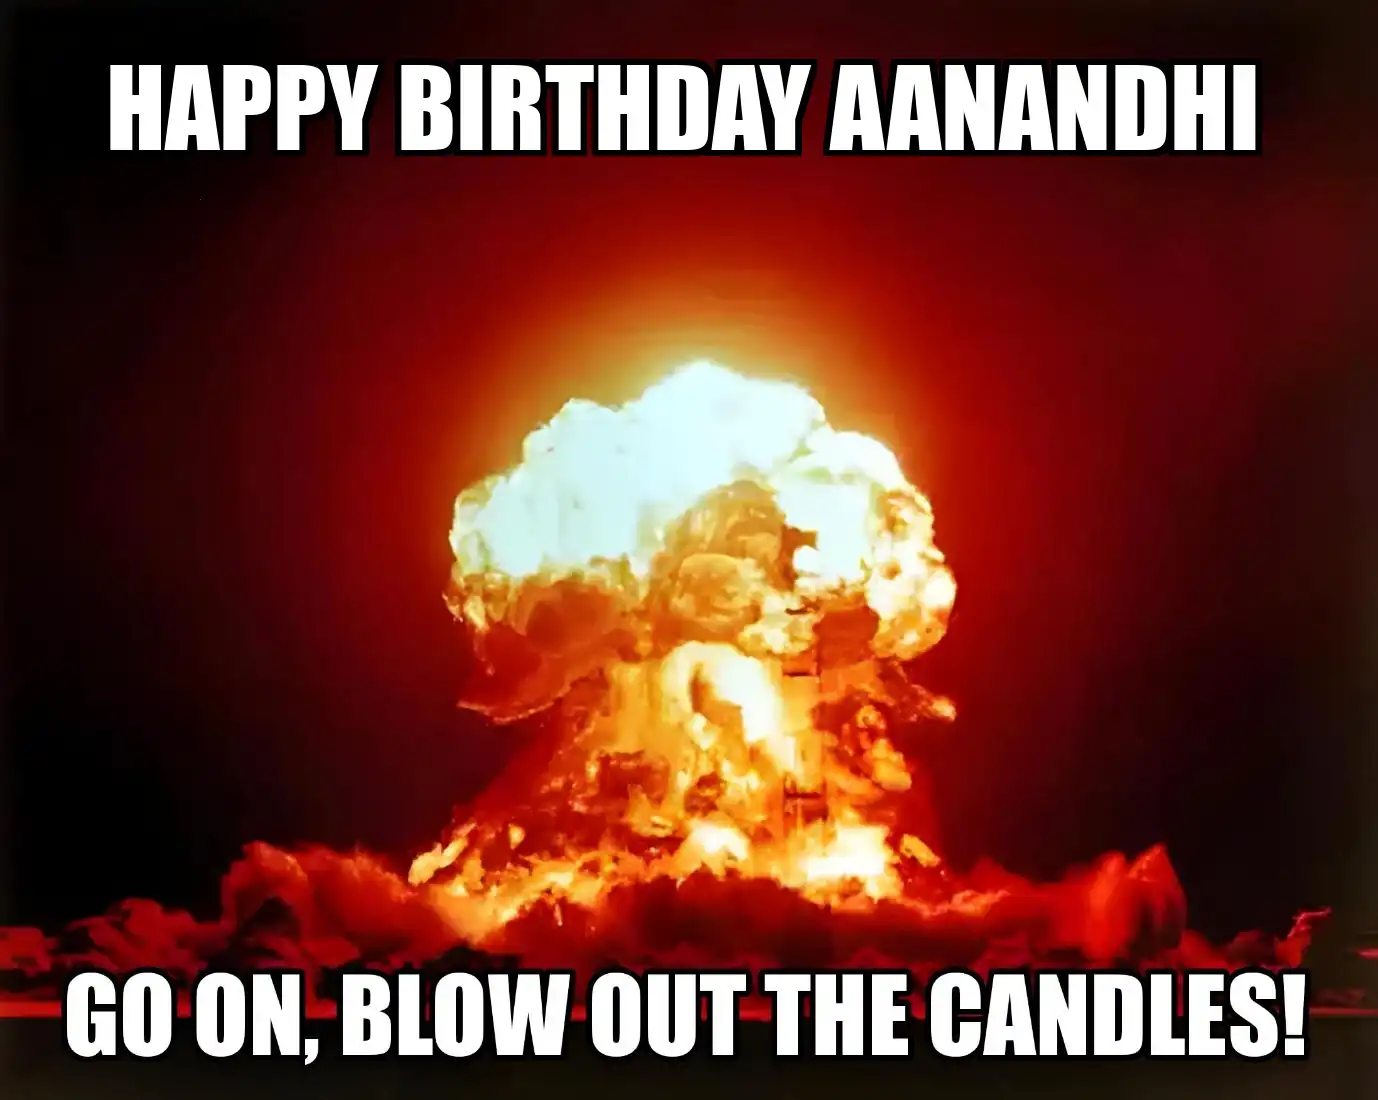 Happy Birthday Aanandhi Go On Blow Out The Candles Meme